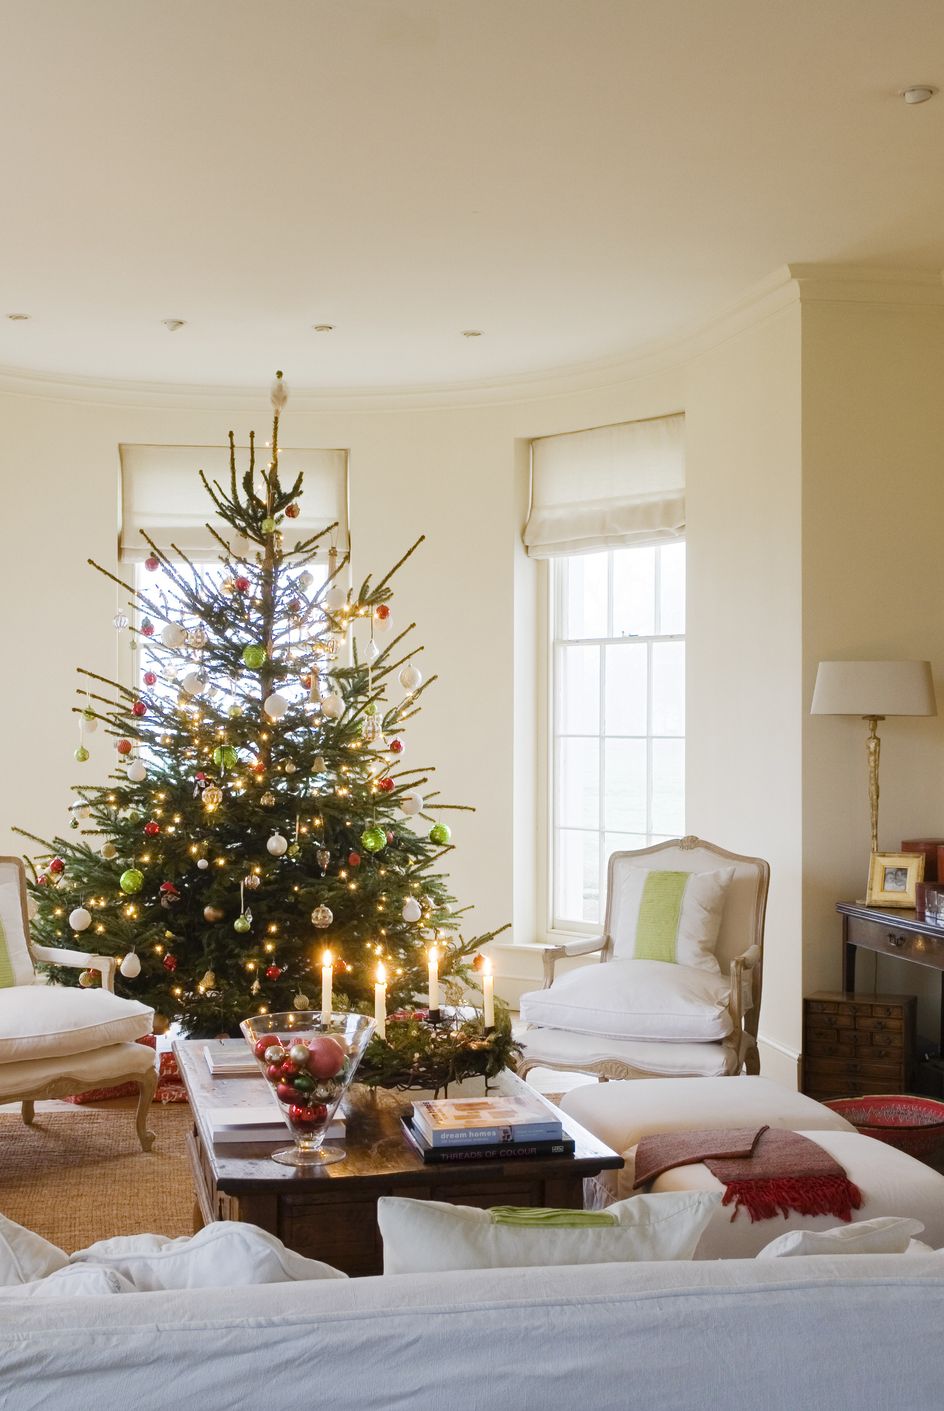 19th century farmhouse conversion decorated for christmas